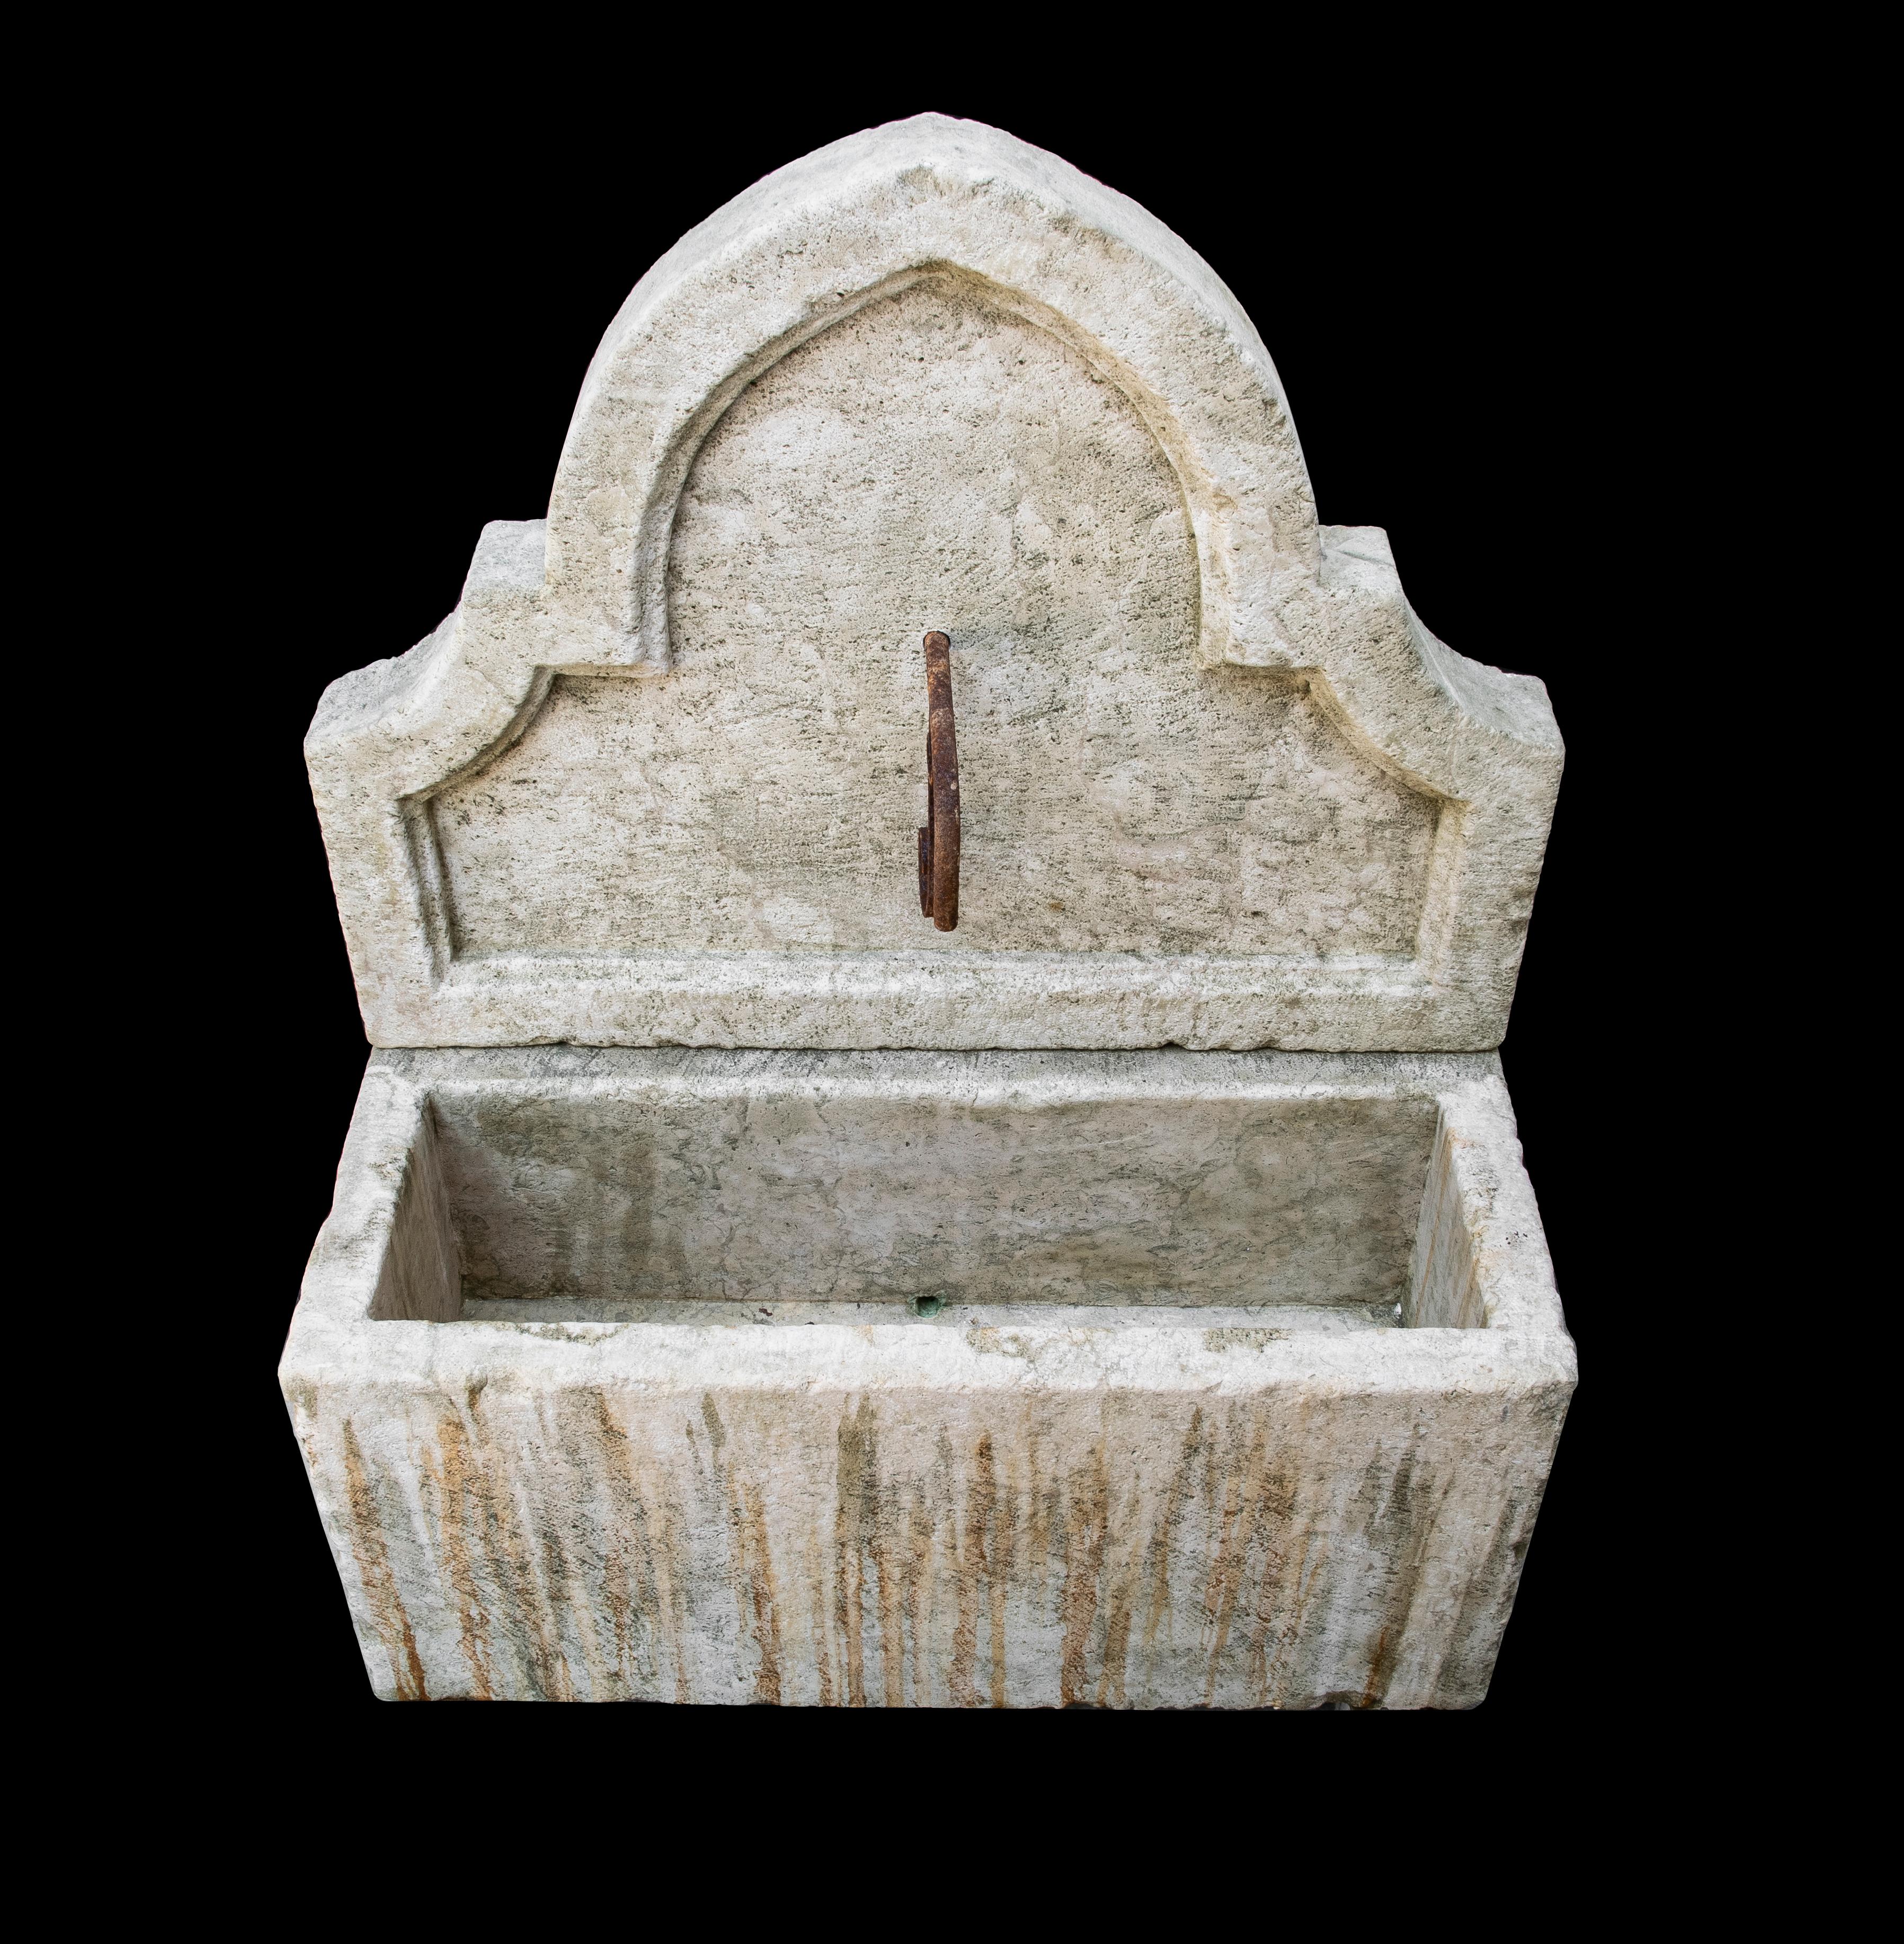 Rustic Beautiful antique reclaimed old limestone wall fountain - Tuscan - Mediterranean For Sale